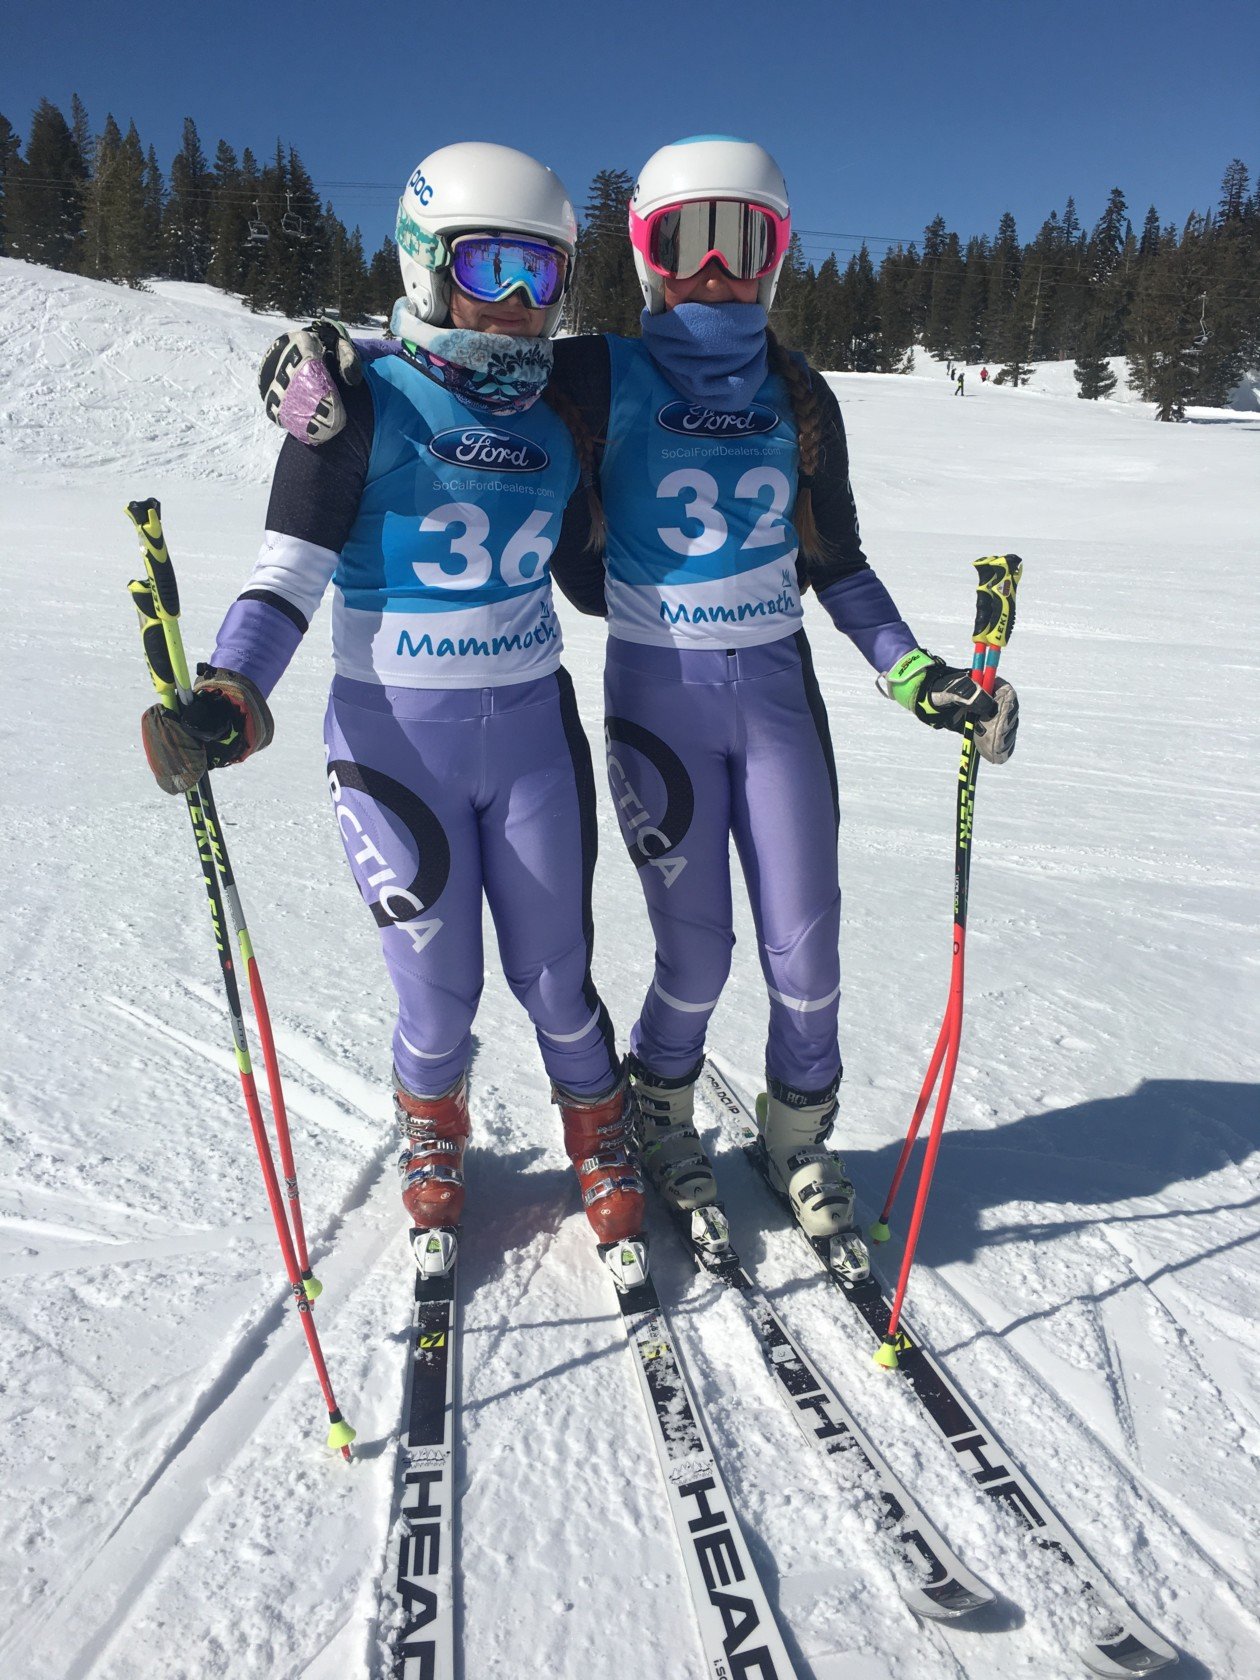 One of our most popular ski racing suits for girls - the Racer GS Speed Suit in Lilac